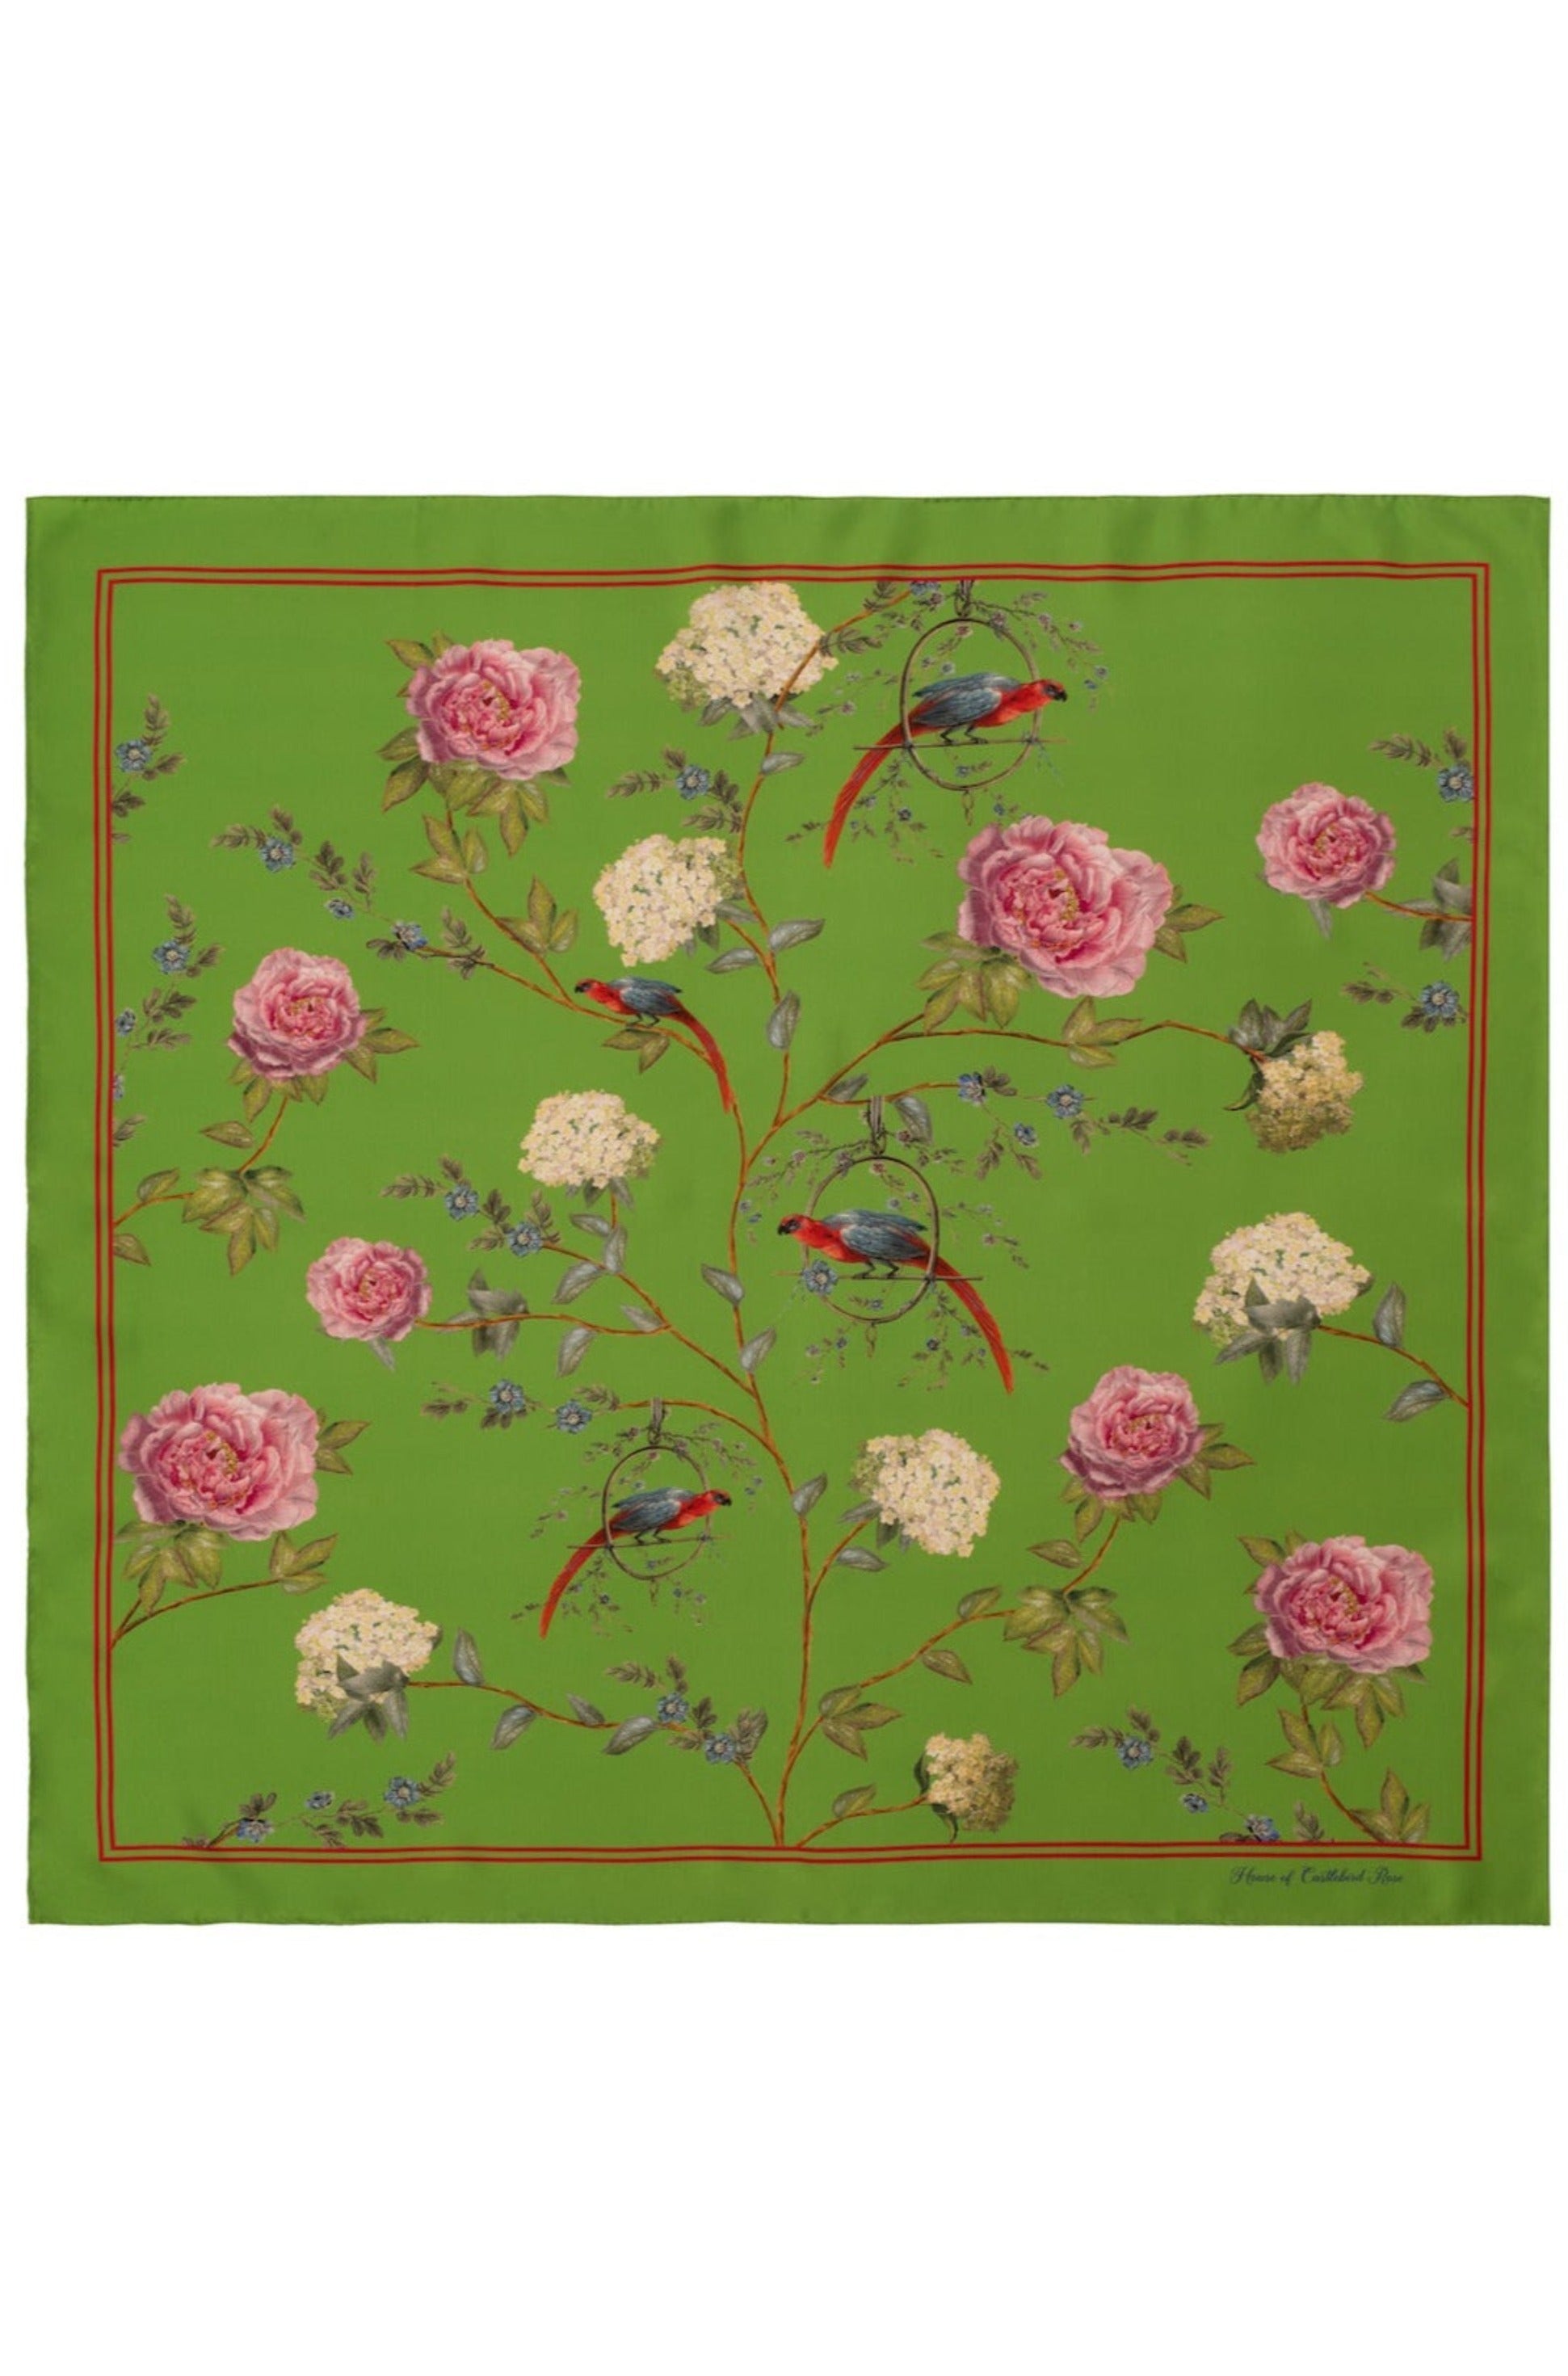 CHINOISERIE SILK SCARF IN EMERALD GREEN - House of Castlebird Rose